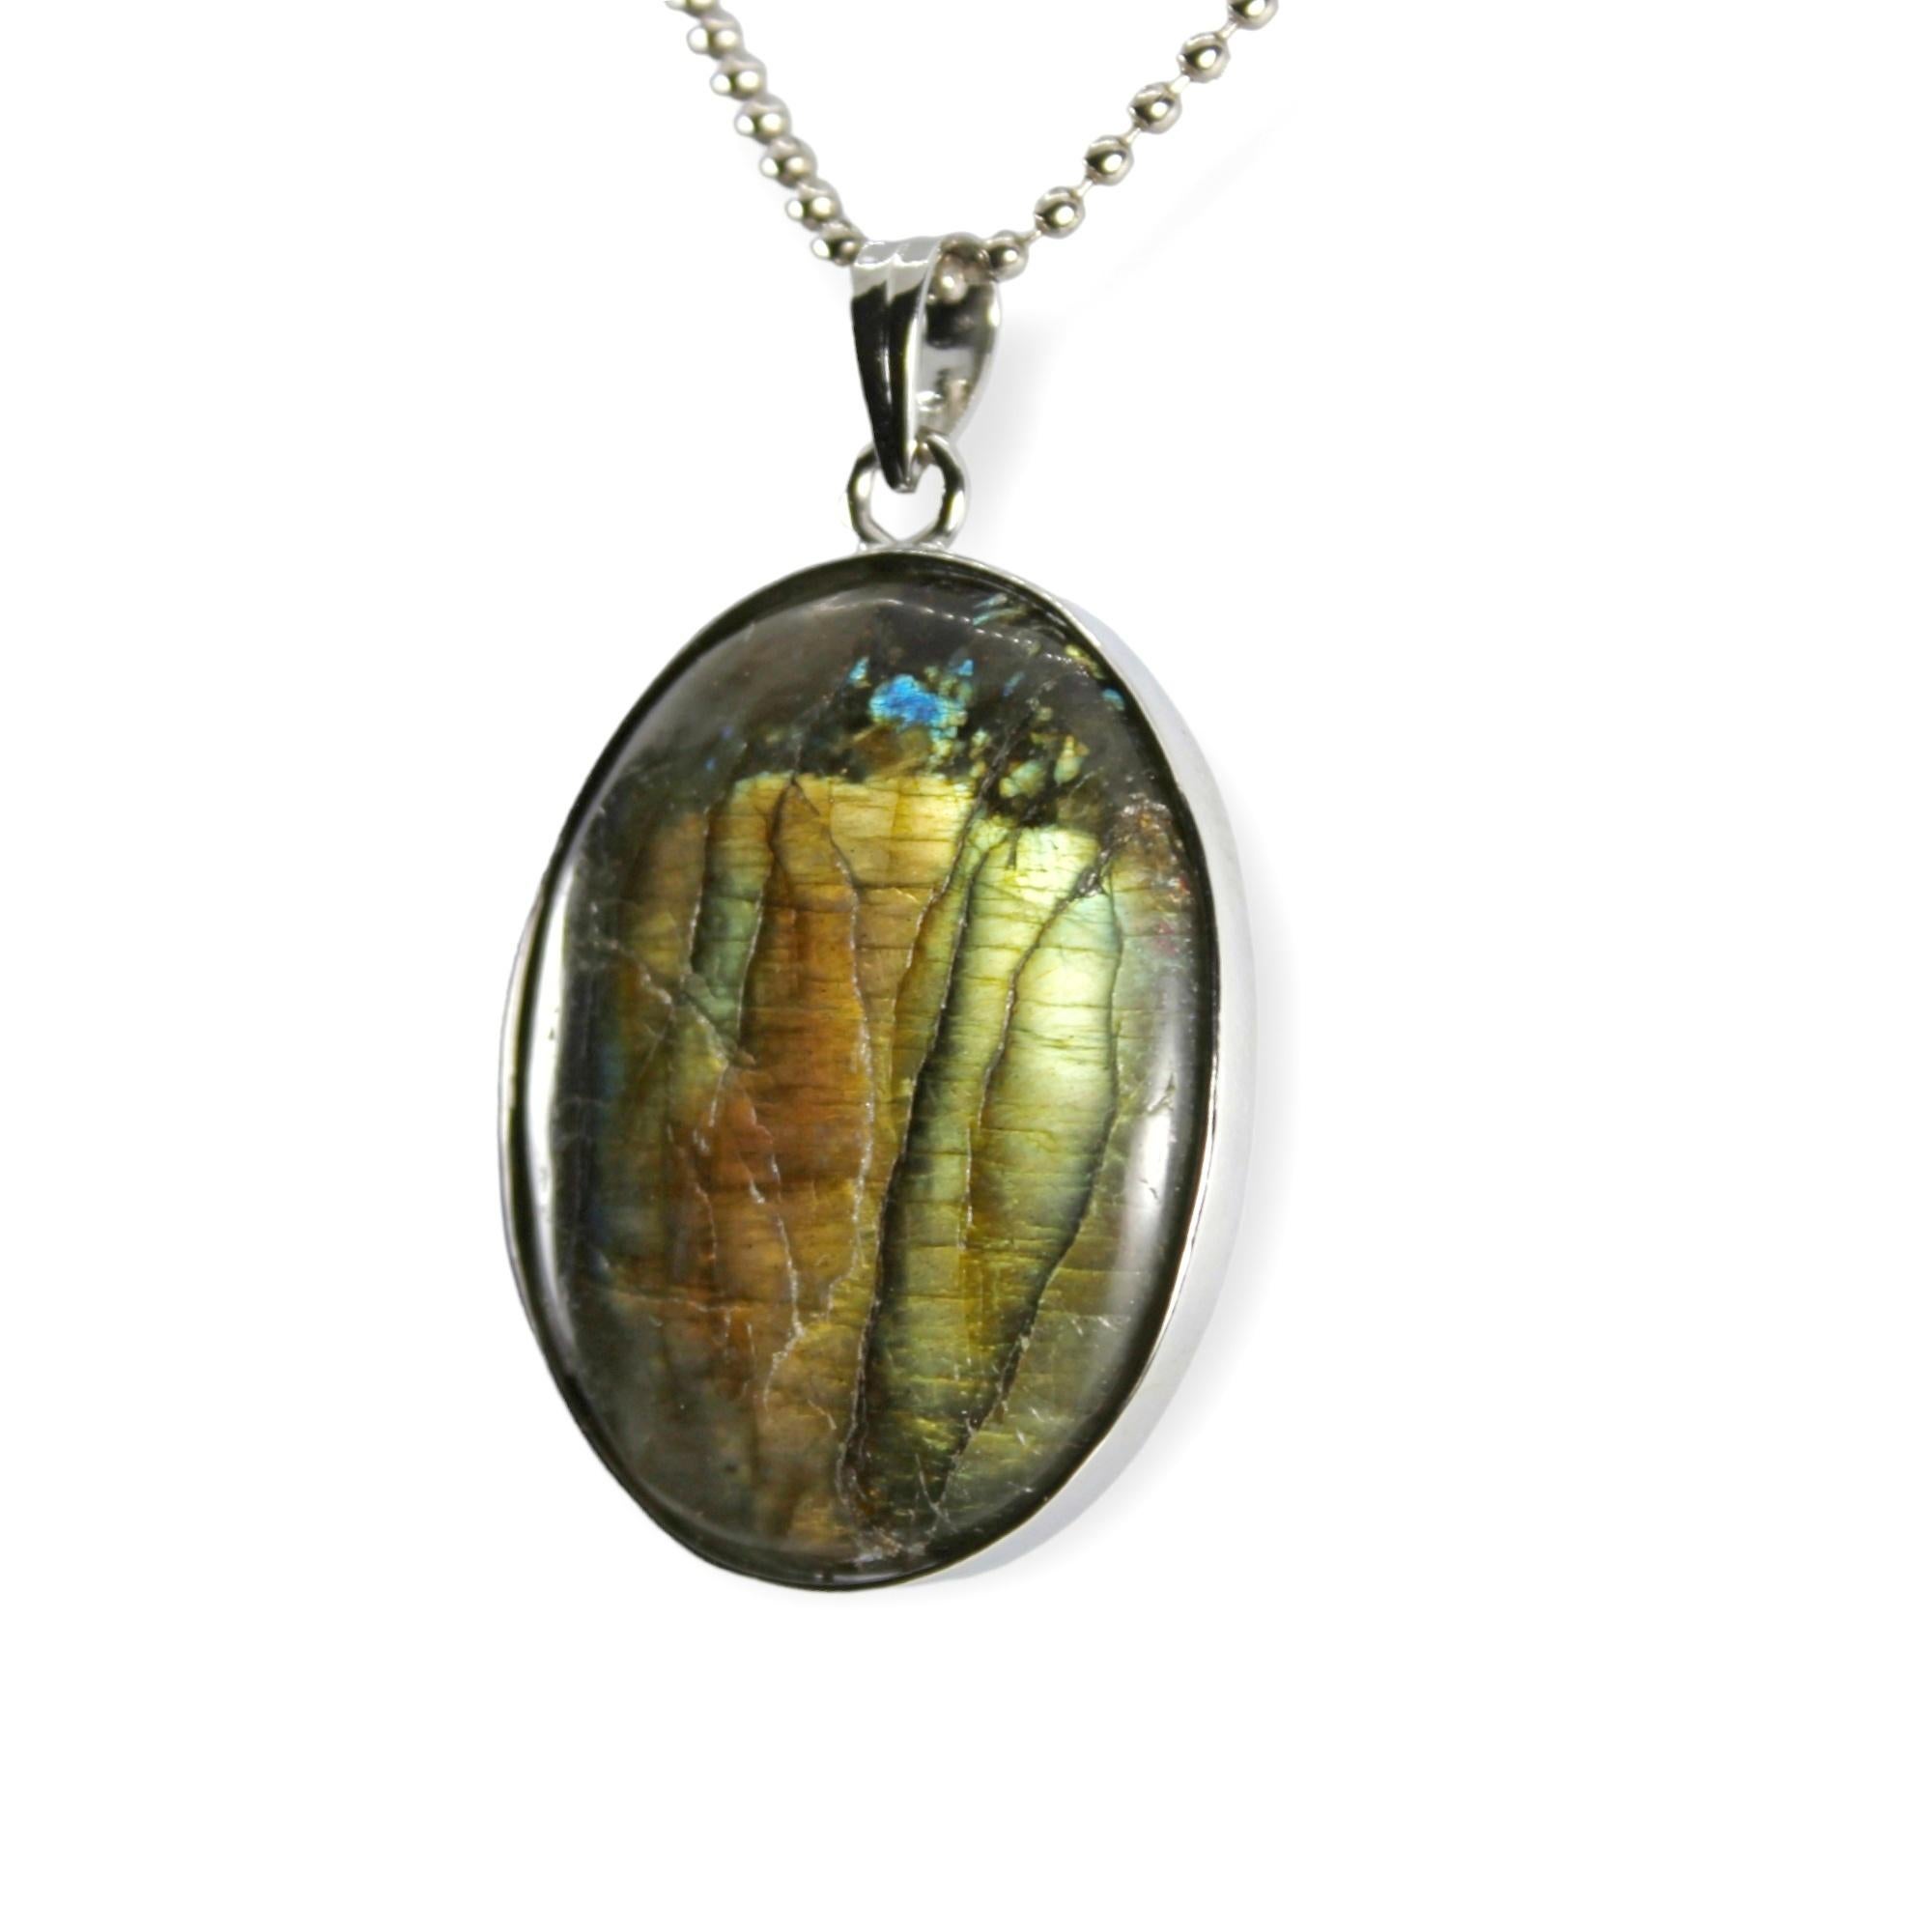 Product specifications :

Gemstone - Natural Labradorite 
Carat weight - 90.45 Carat
Total piece weight - 21.72 grams
Metal - sterling silver
Metal weight - 3.6 grams
Pendant dimensions - 53 x 32 x 4 mm

This stunning green labradorite pendant is